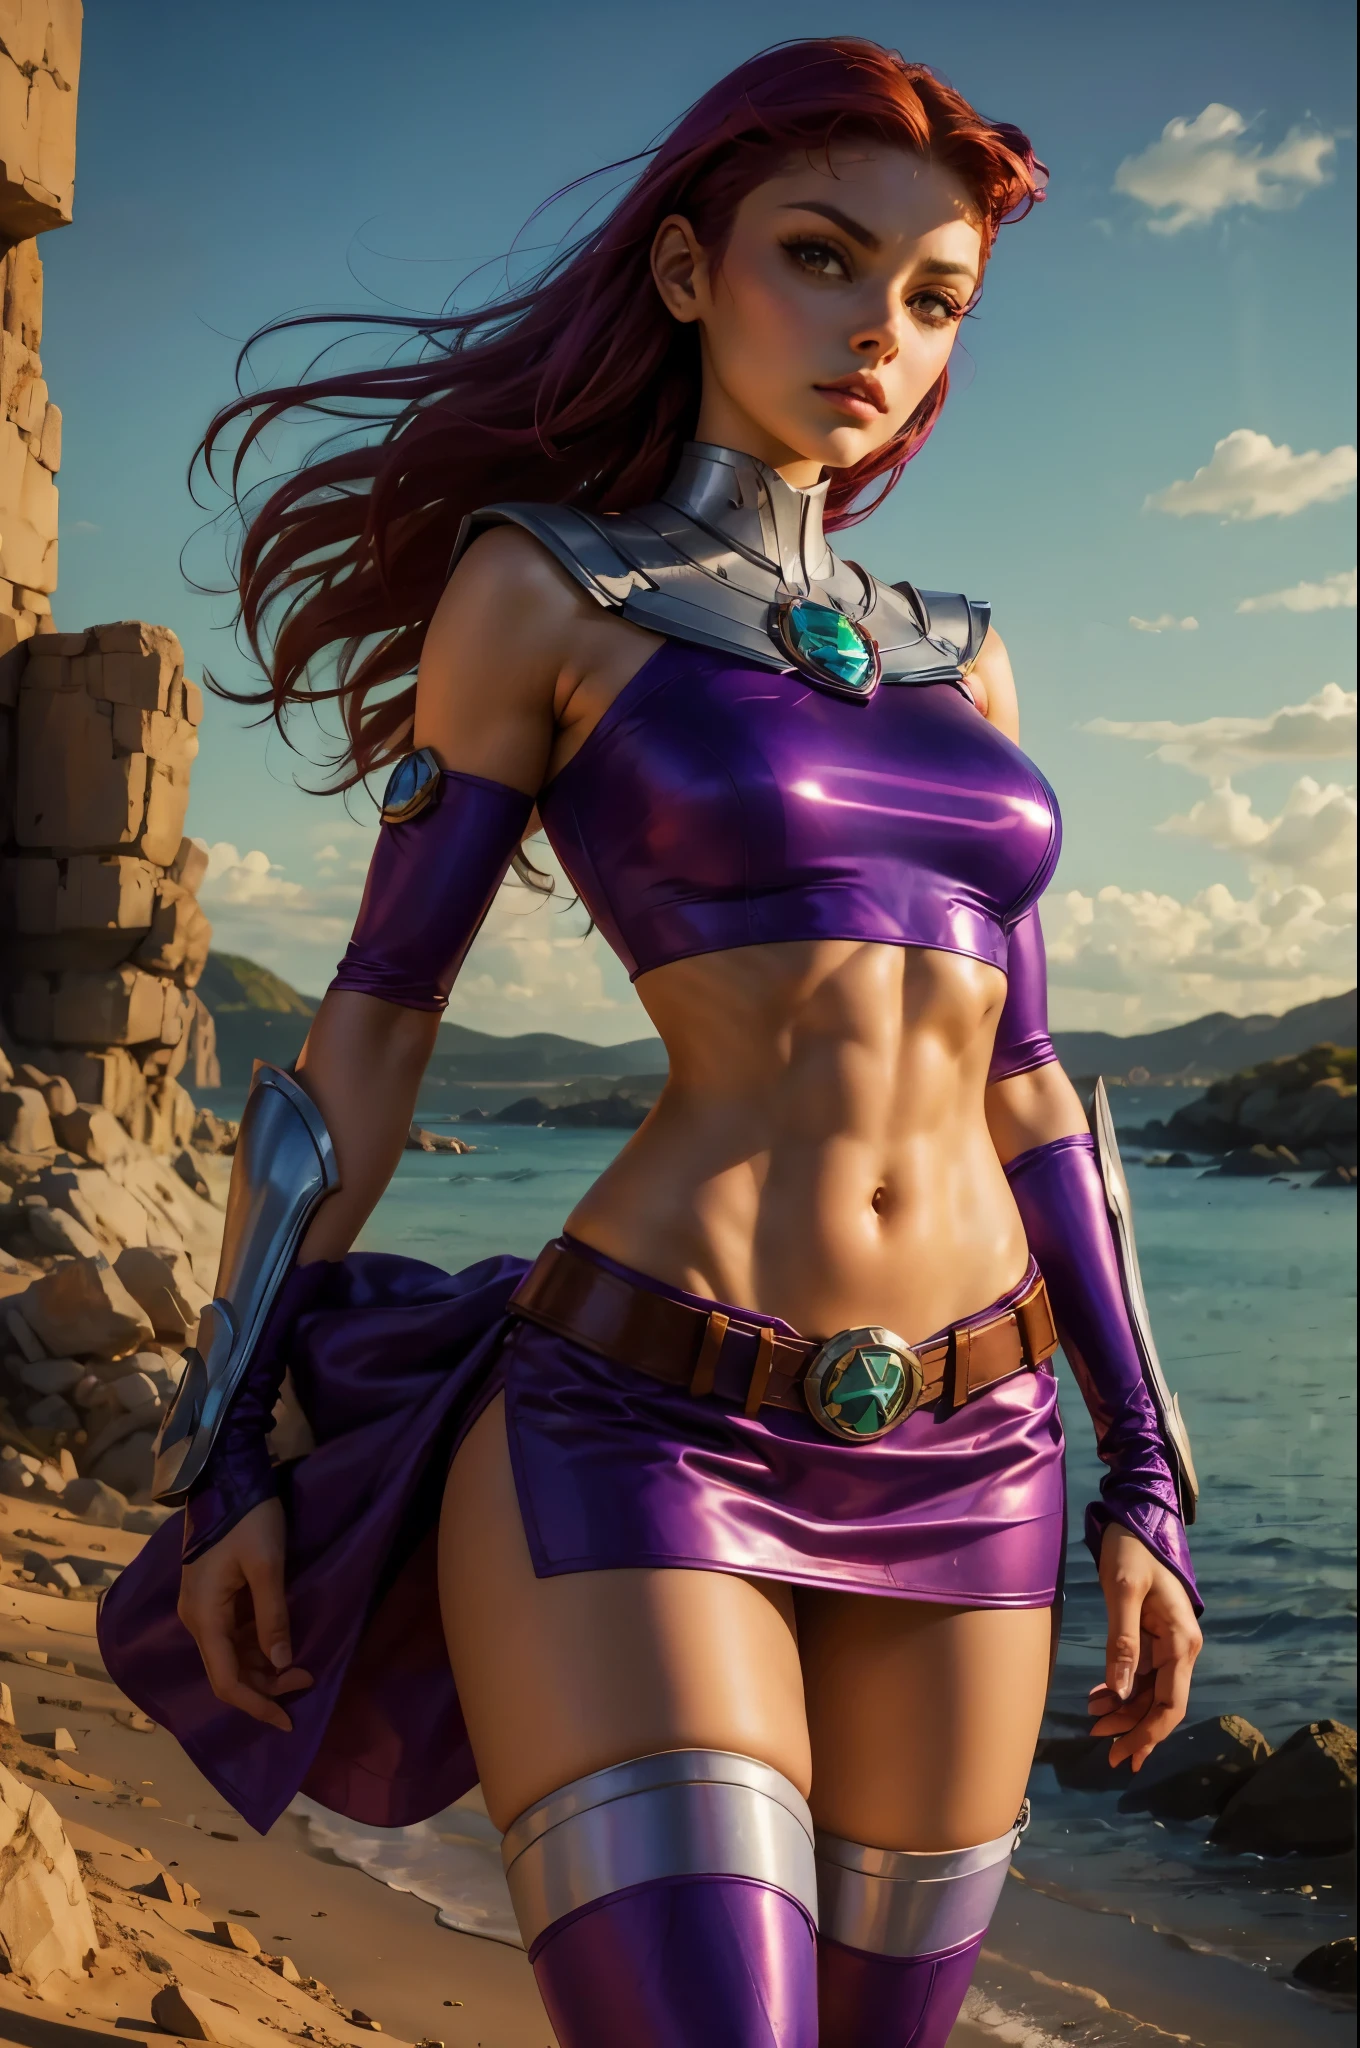 a close up of a woman in a purple outfit on a beach, starfire, full body portrait of jean grey, alena aenami and artgerm, sleek purple armor, samira from league of legends, purple armor, purple body, artgerm moody photography, jean grey, glamourous cosplay, full-cosplay, megara